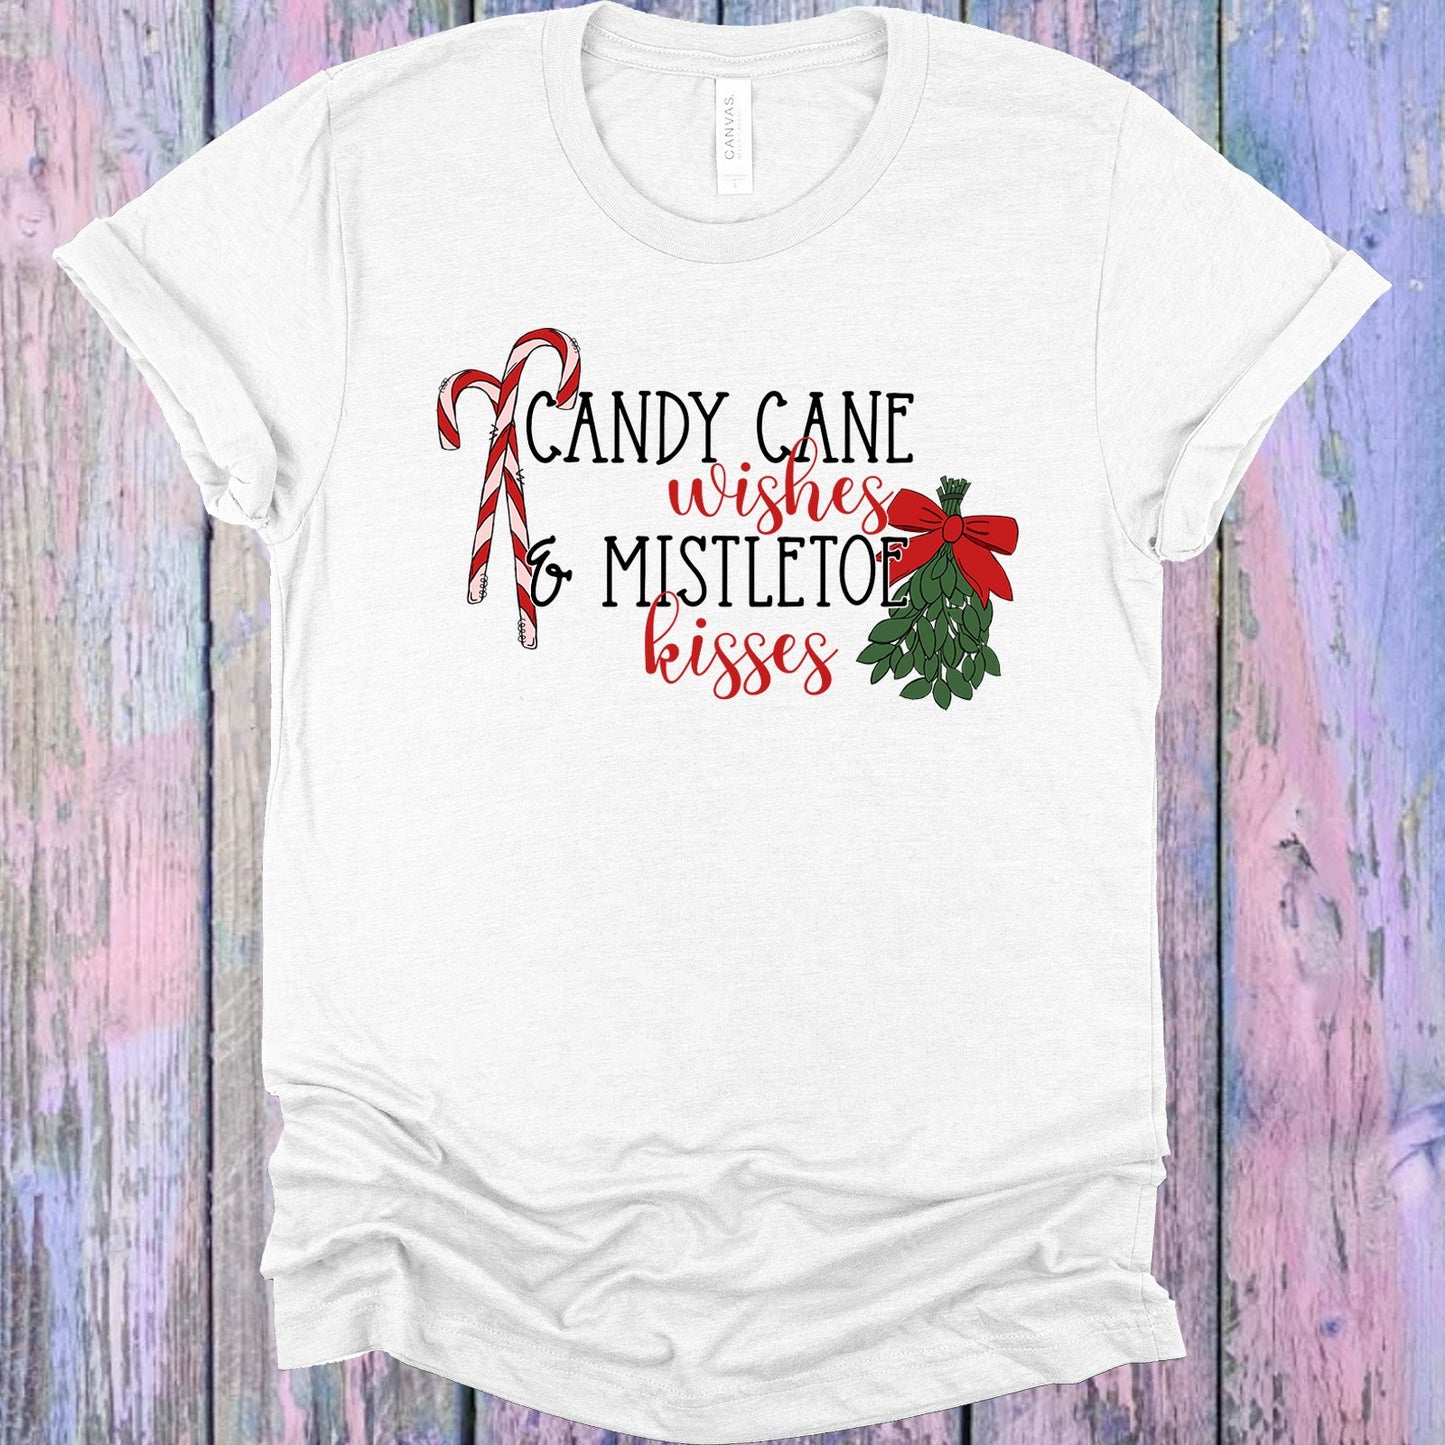 Candy Cane Wishes & Mistletoe Kisses Graphic Tee Graphic Tee